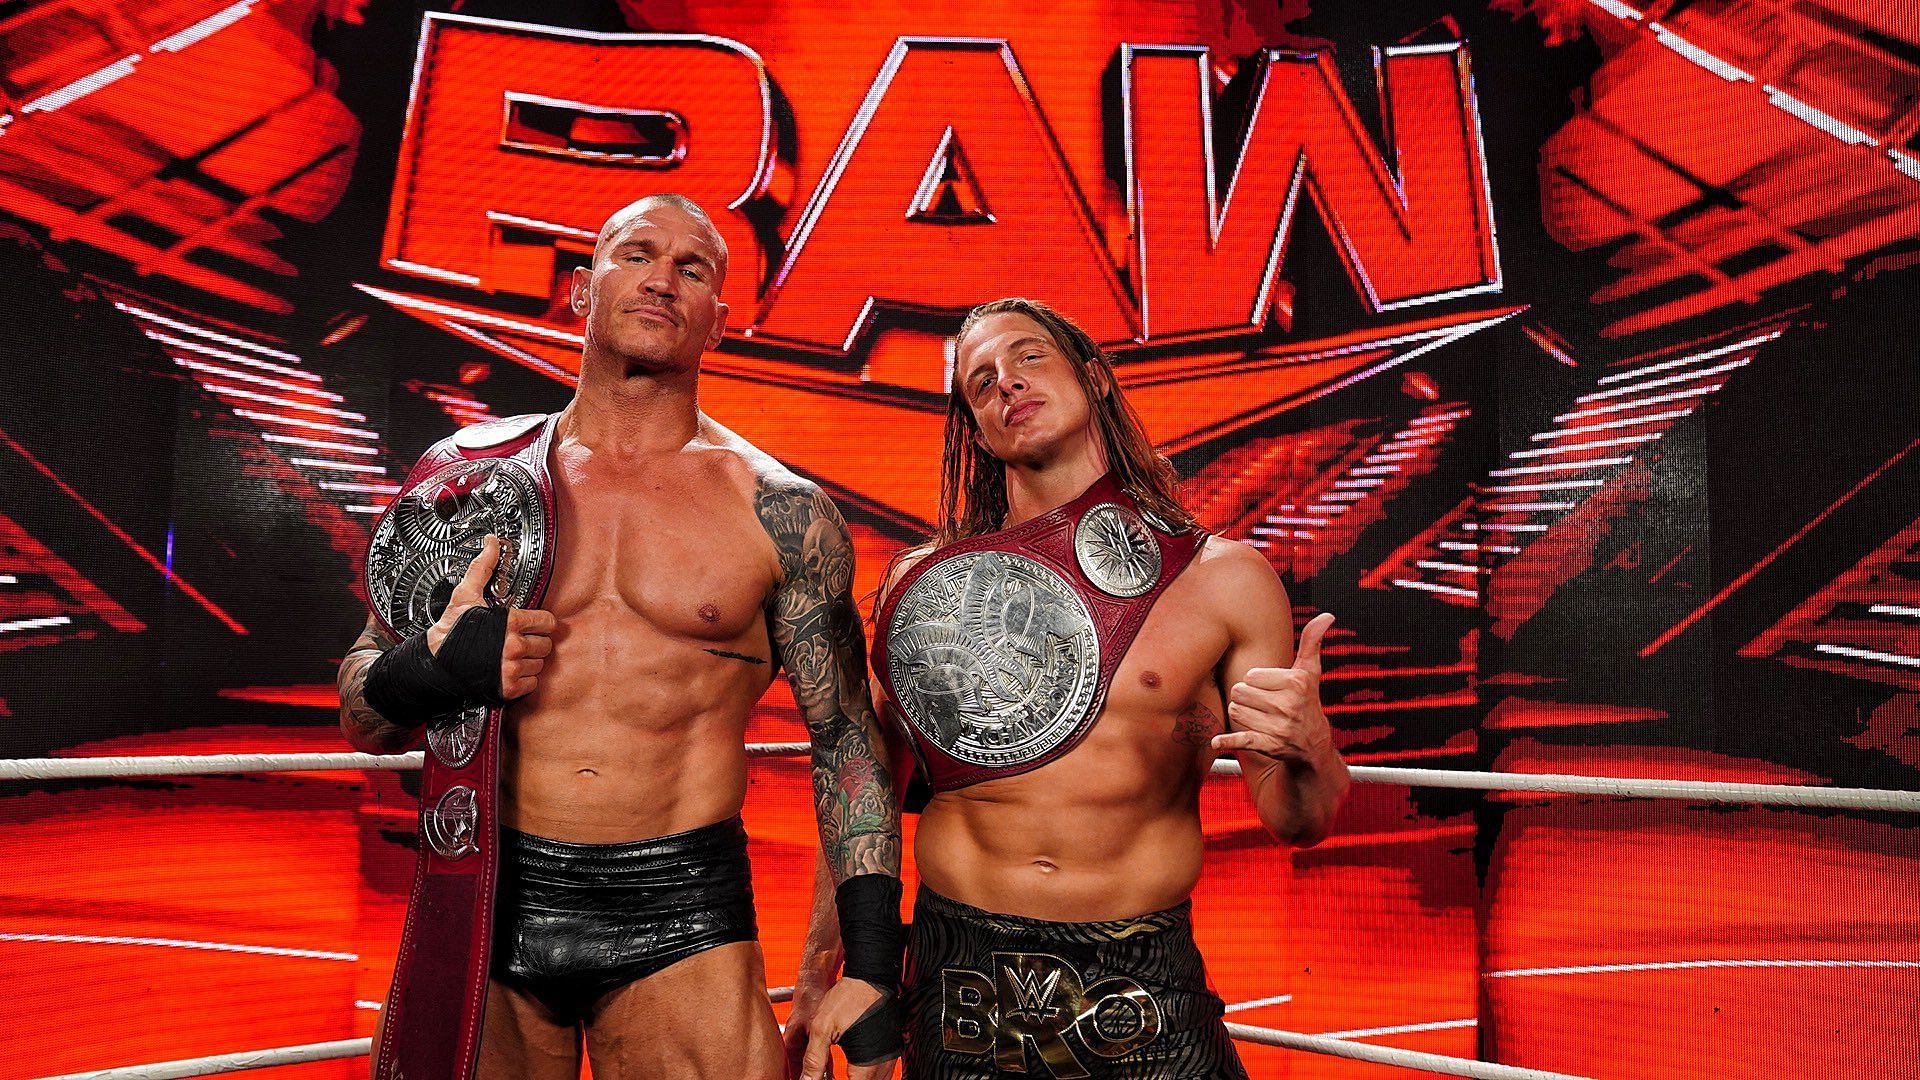 Randy Orton has thrived teaming with Riddle.